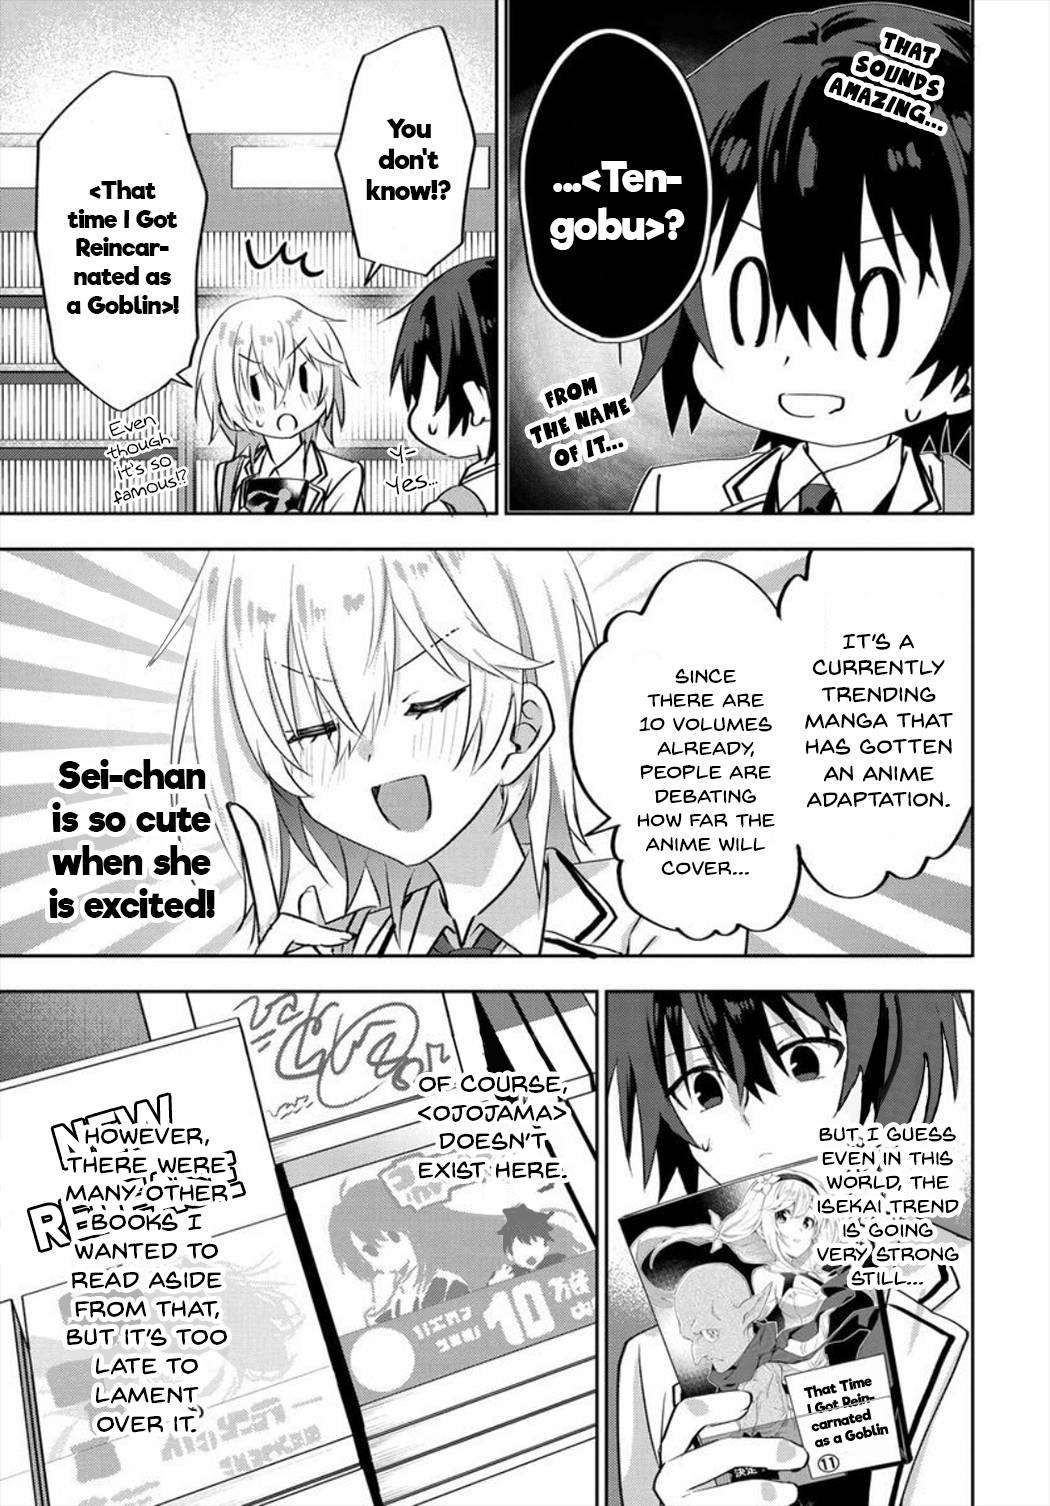 Since I’Ve Entered The World Of Romantic Comedy Manga, I’Ll Do My Best To Make The Losing Heroine Happy - chapter 5.1 - #3